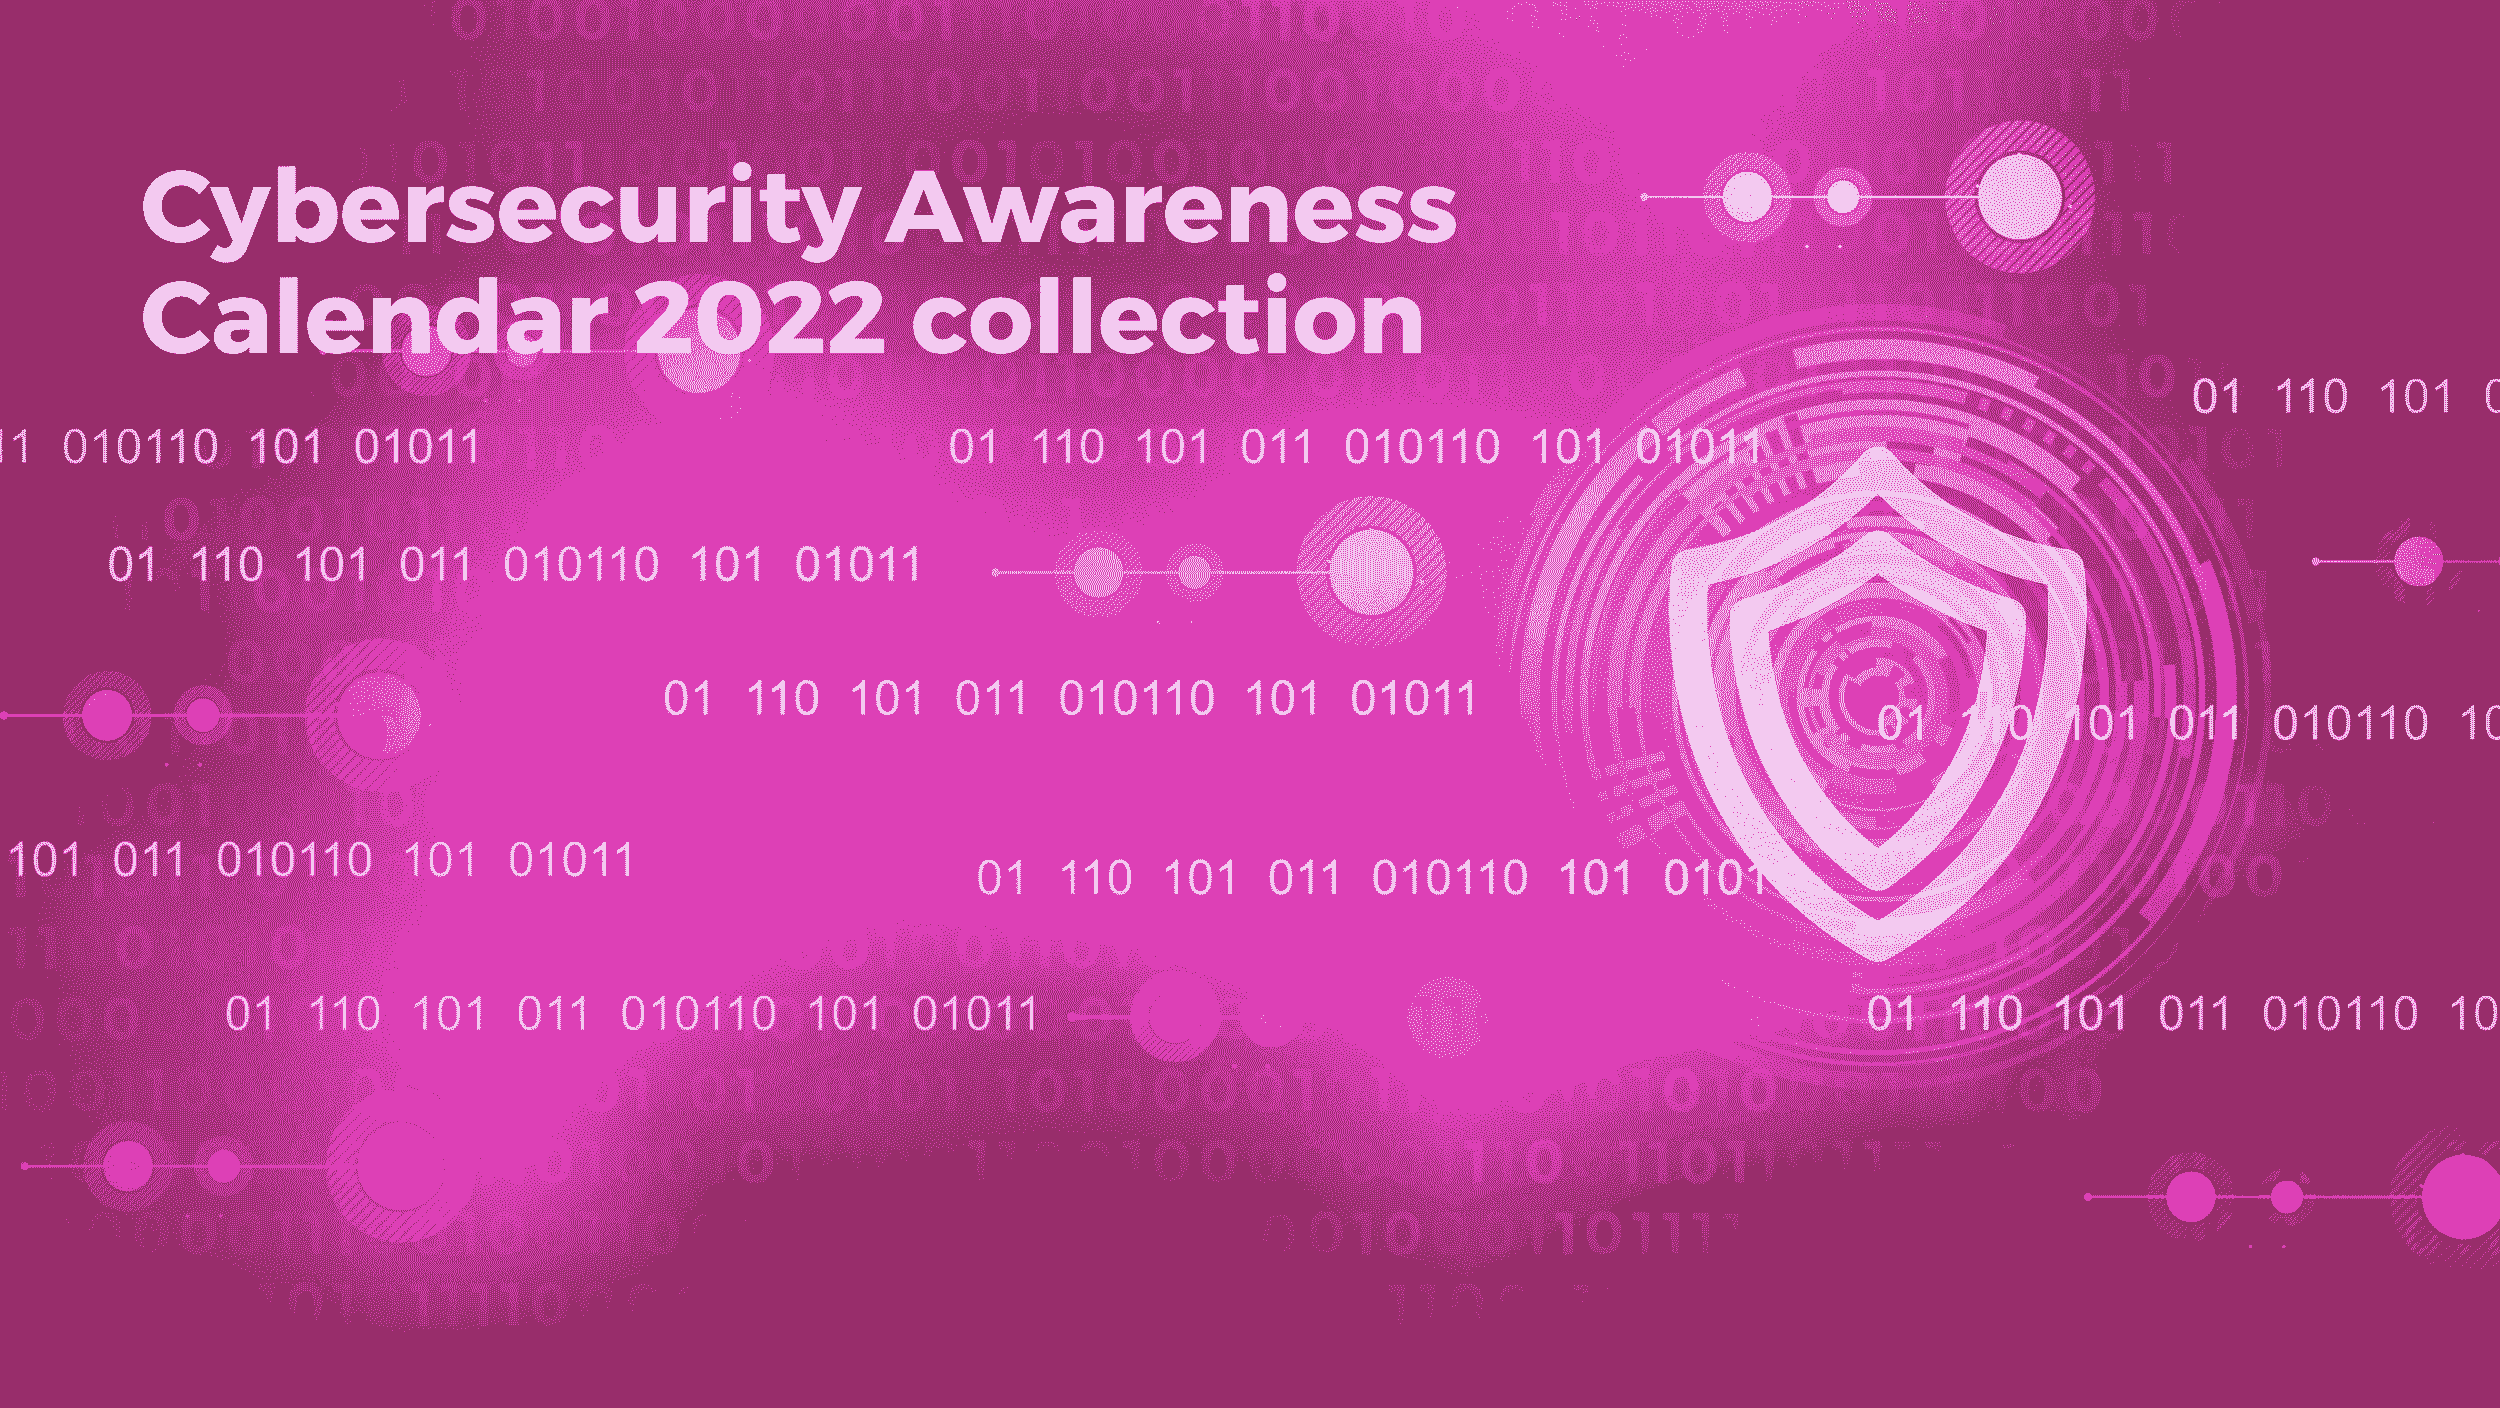 A visual for the 2022 collection of ECSO's Cybersecurity Awareness Calendar.